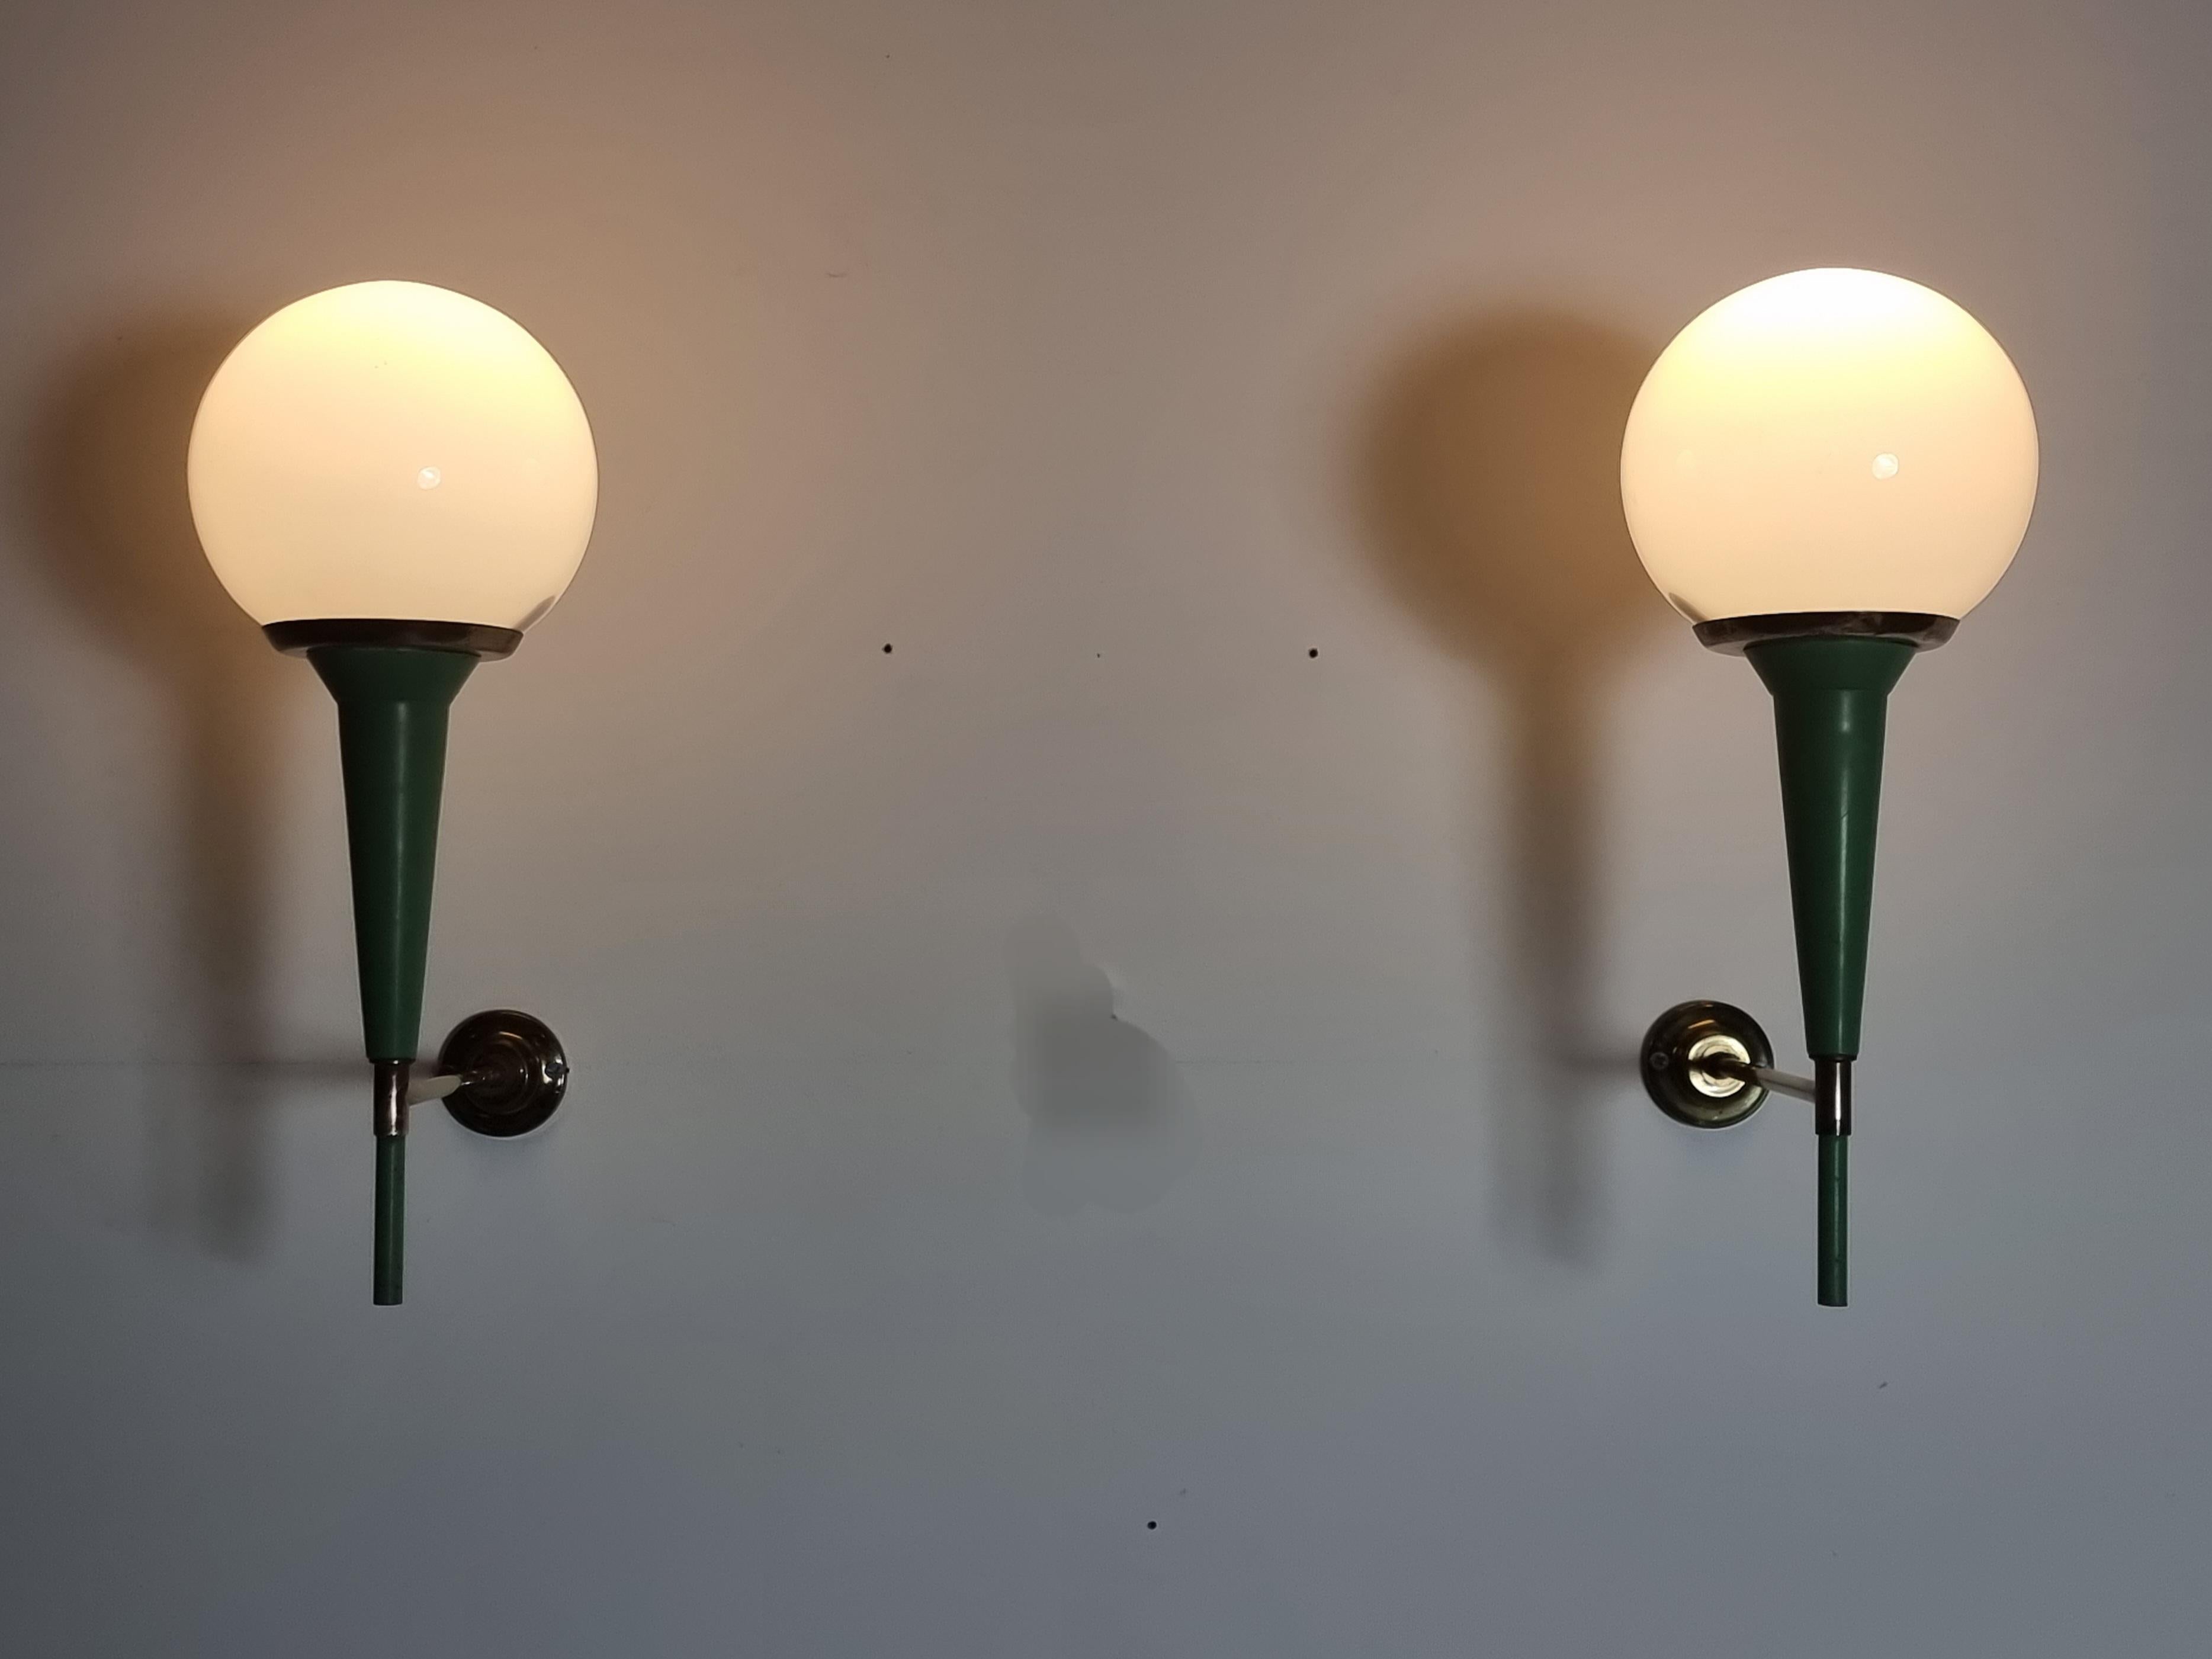 Set of 2 Enamel and Brass Wall Lights/Scones, France, 1950s For Sale 3